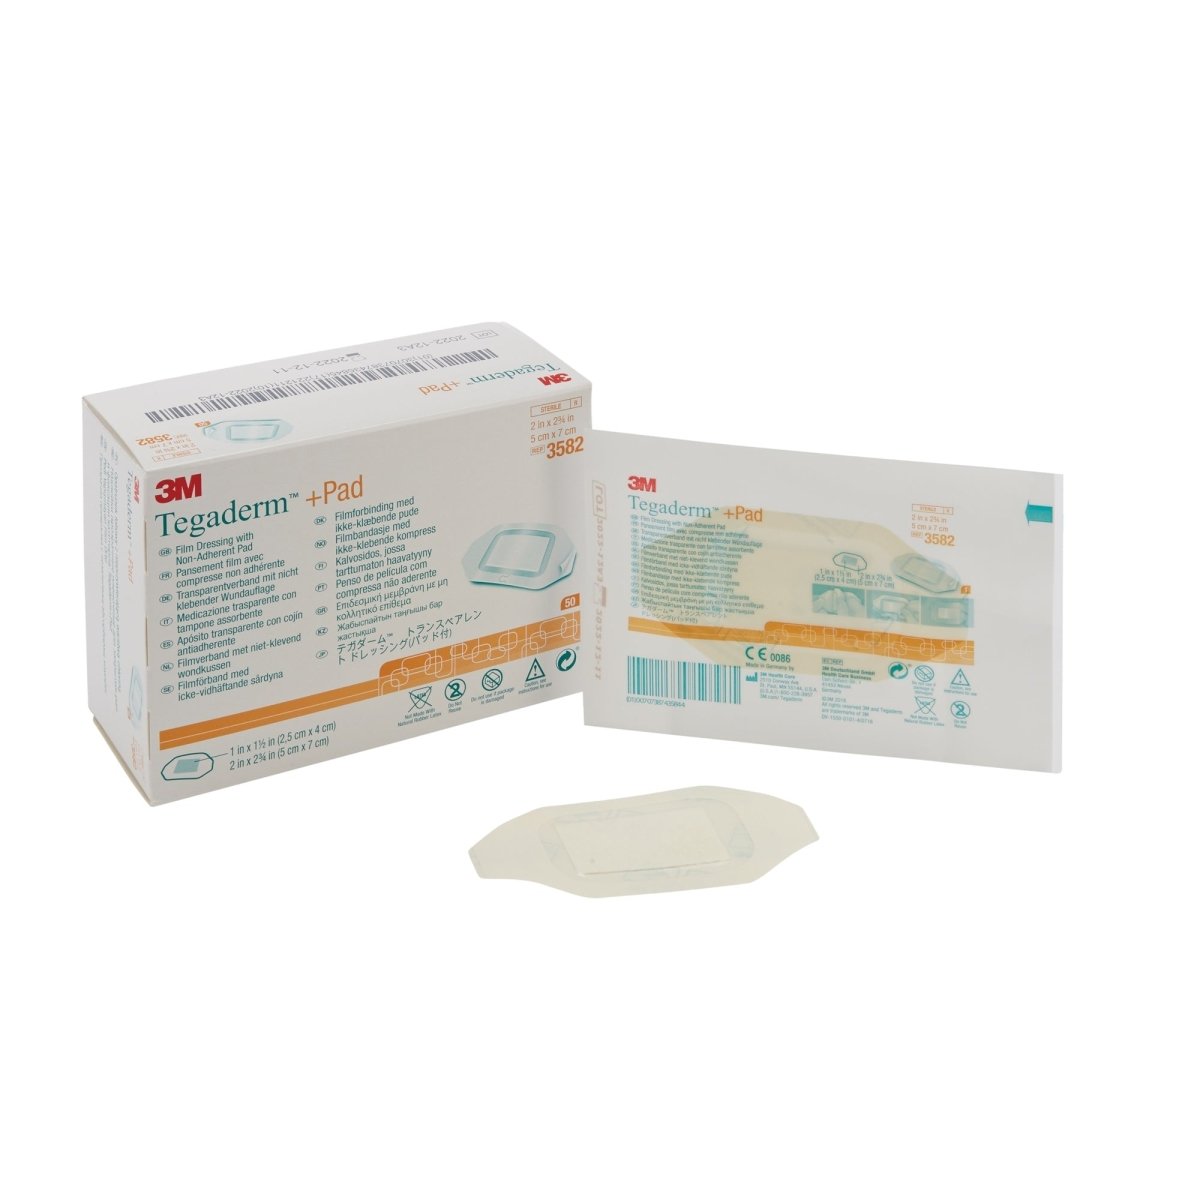 3M Tegaderm Film Dressing with Pad, Sterile, Transparent, Non-Adherent - 311916_BX - 1